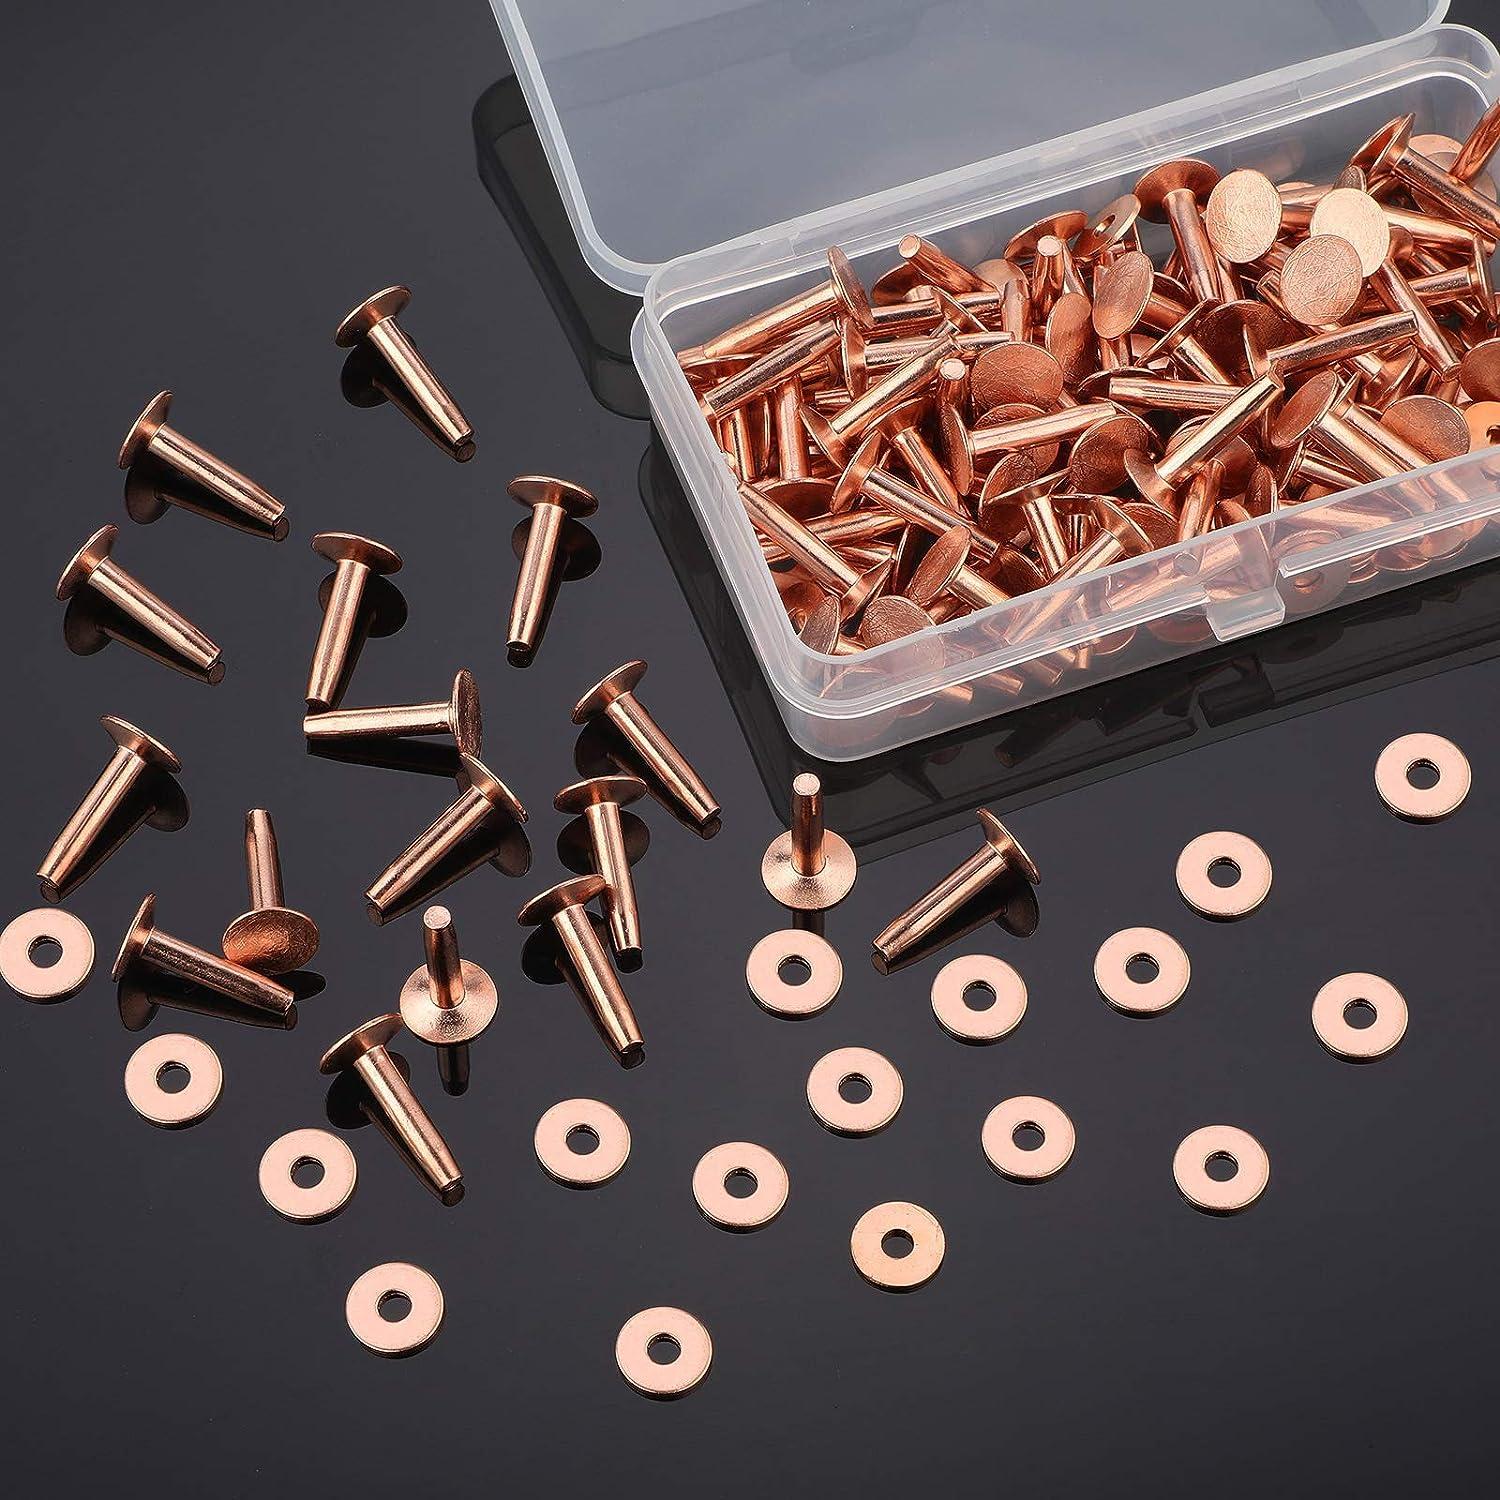 100 Sets Copper Rivets and Burrs Washers Leather Copper Rivet Fastener for  Belts Wallets Collars Leather DIY Craft Supplies (9/16 Inch Size 12)